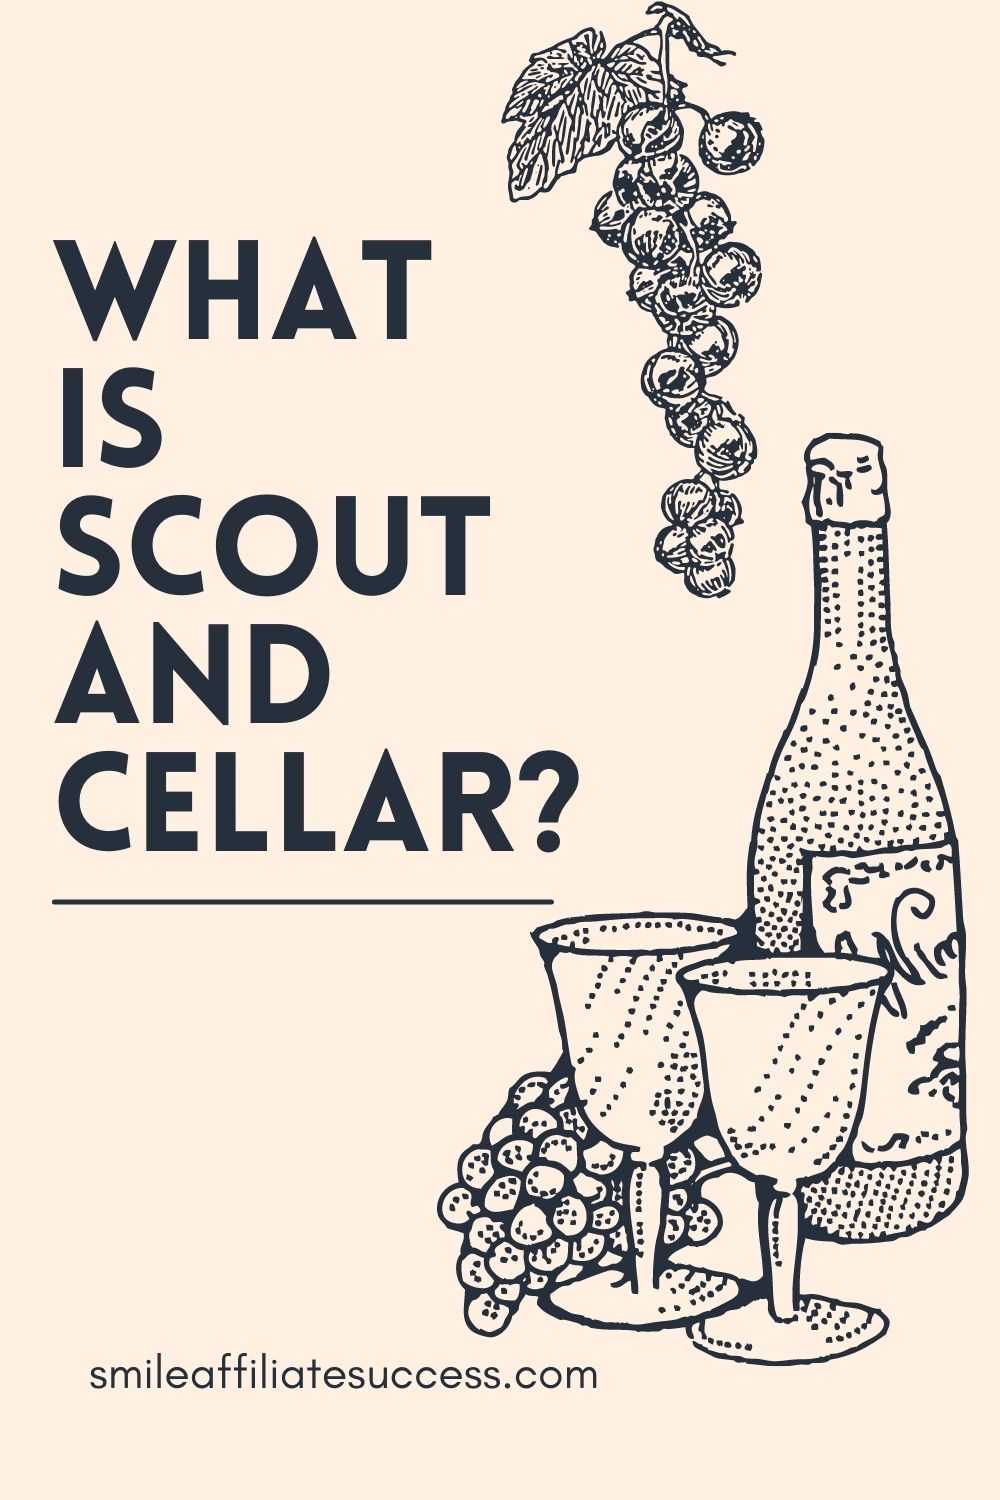 What Is Scout And Cellar?